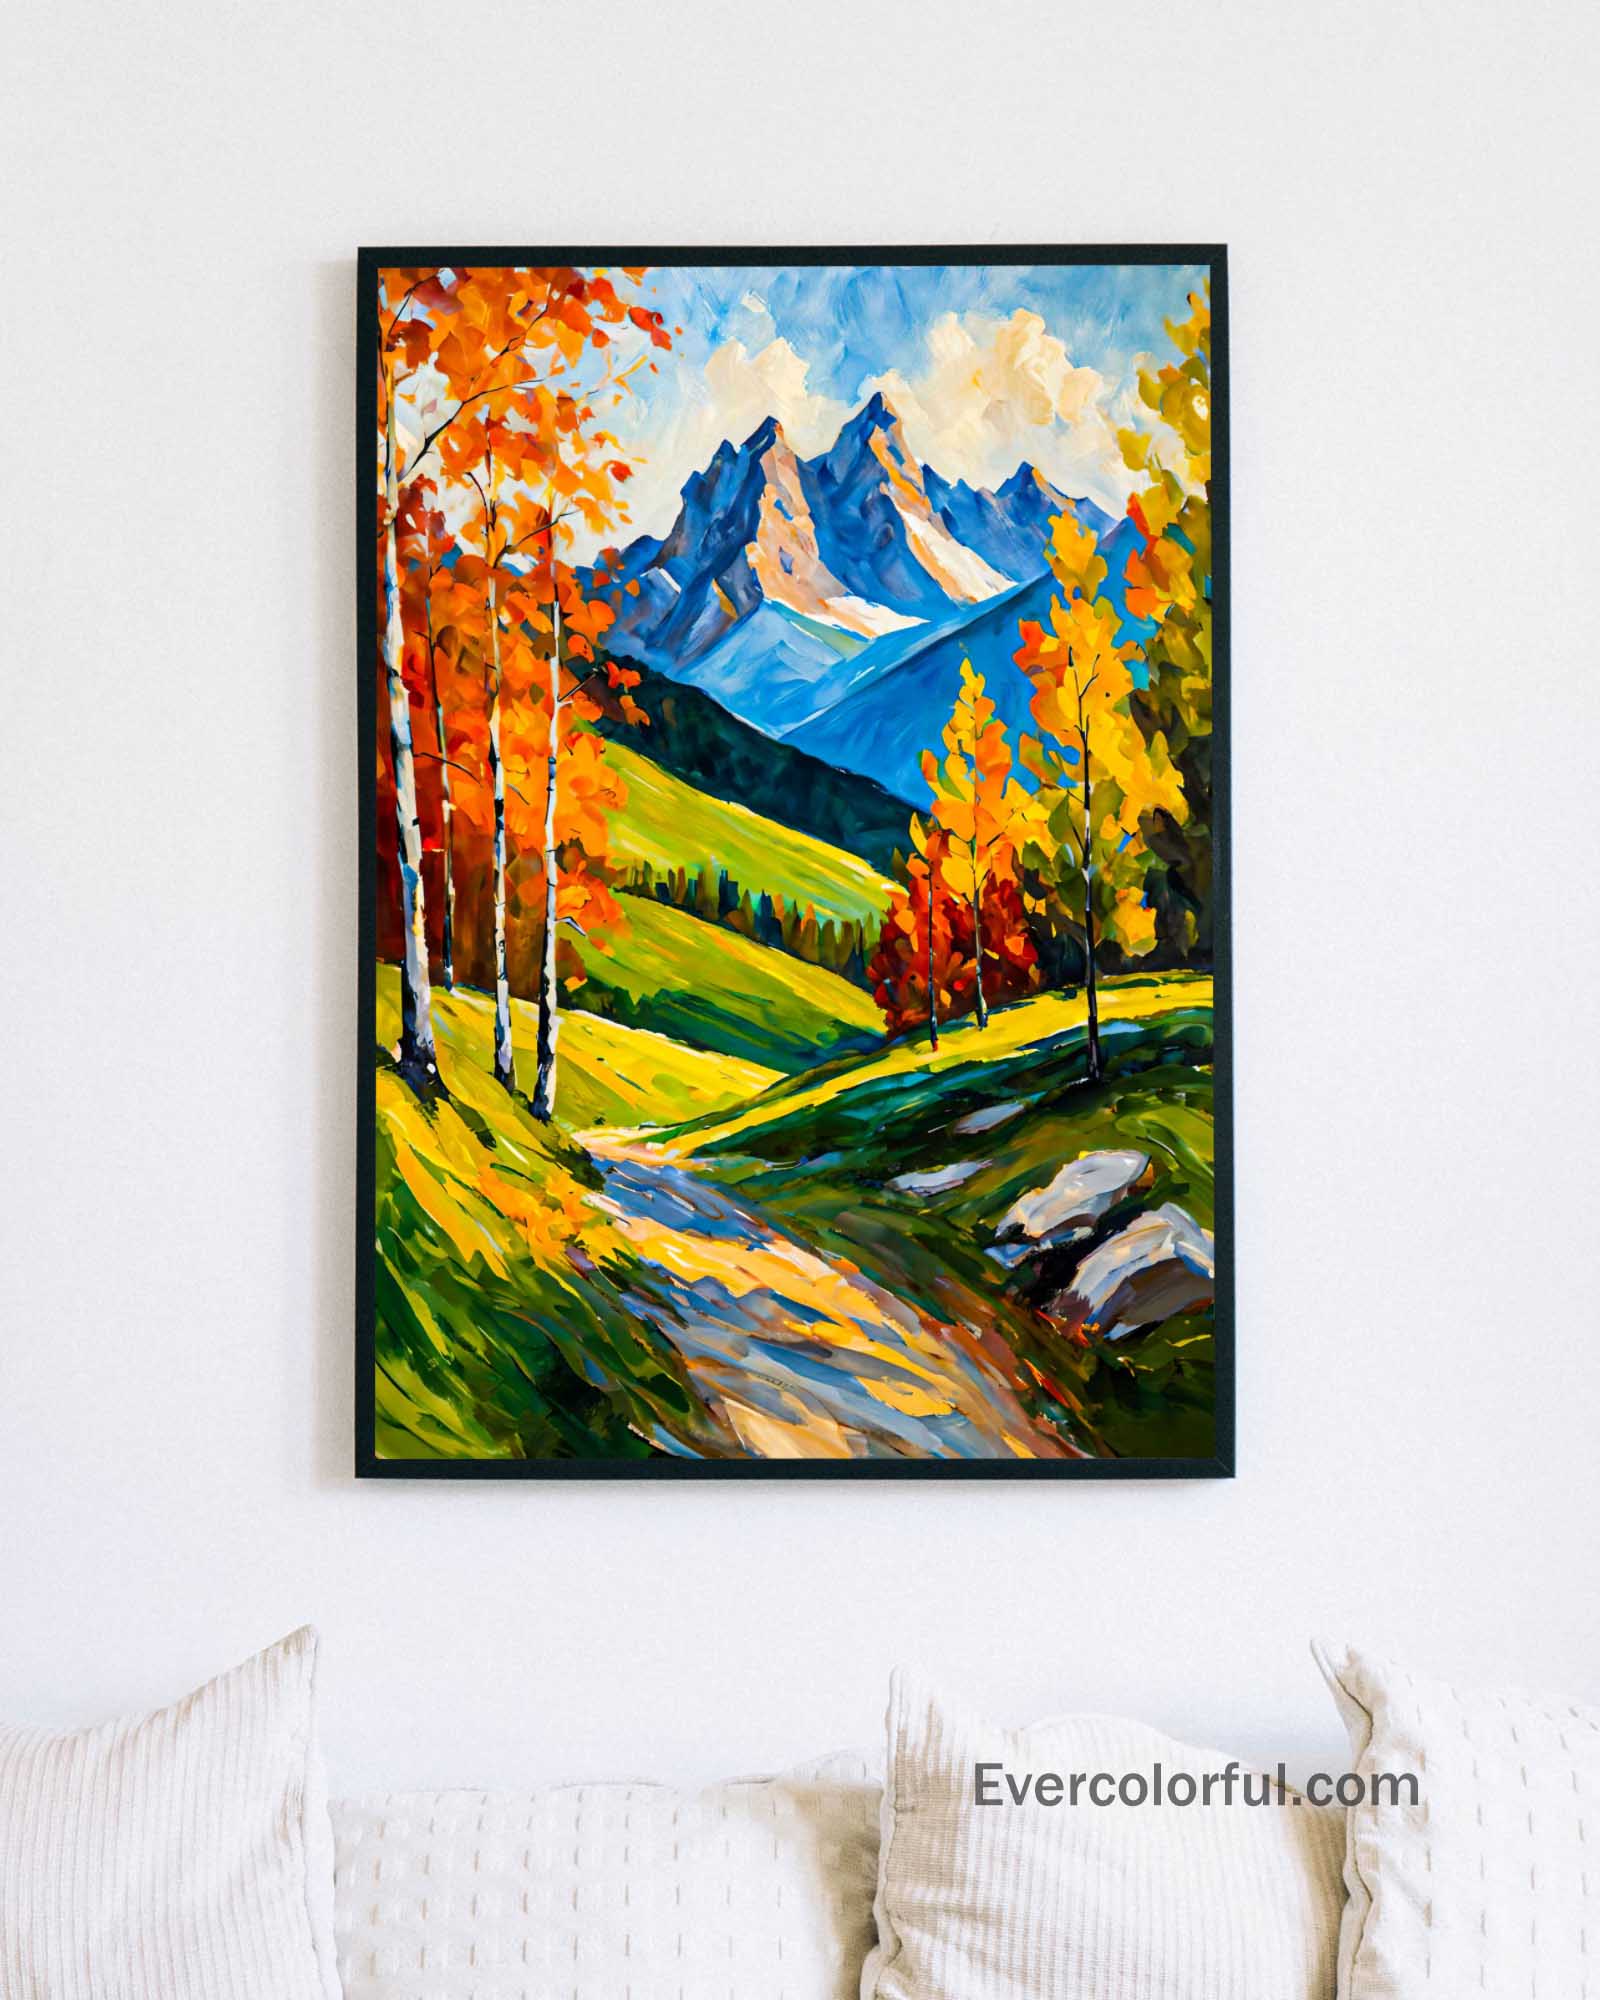 Path to the peak - Poster - Ever colorful